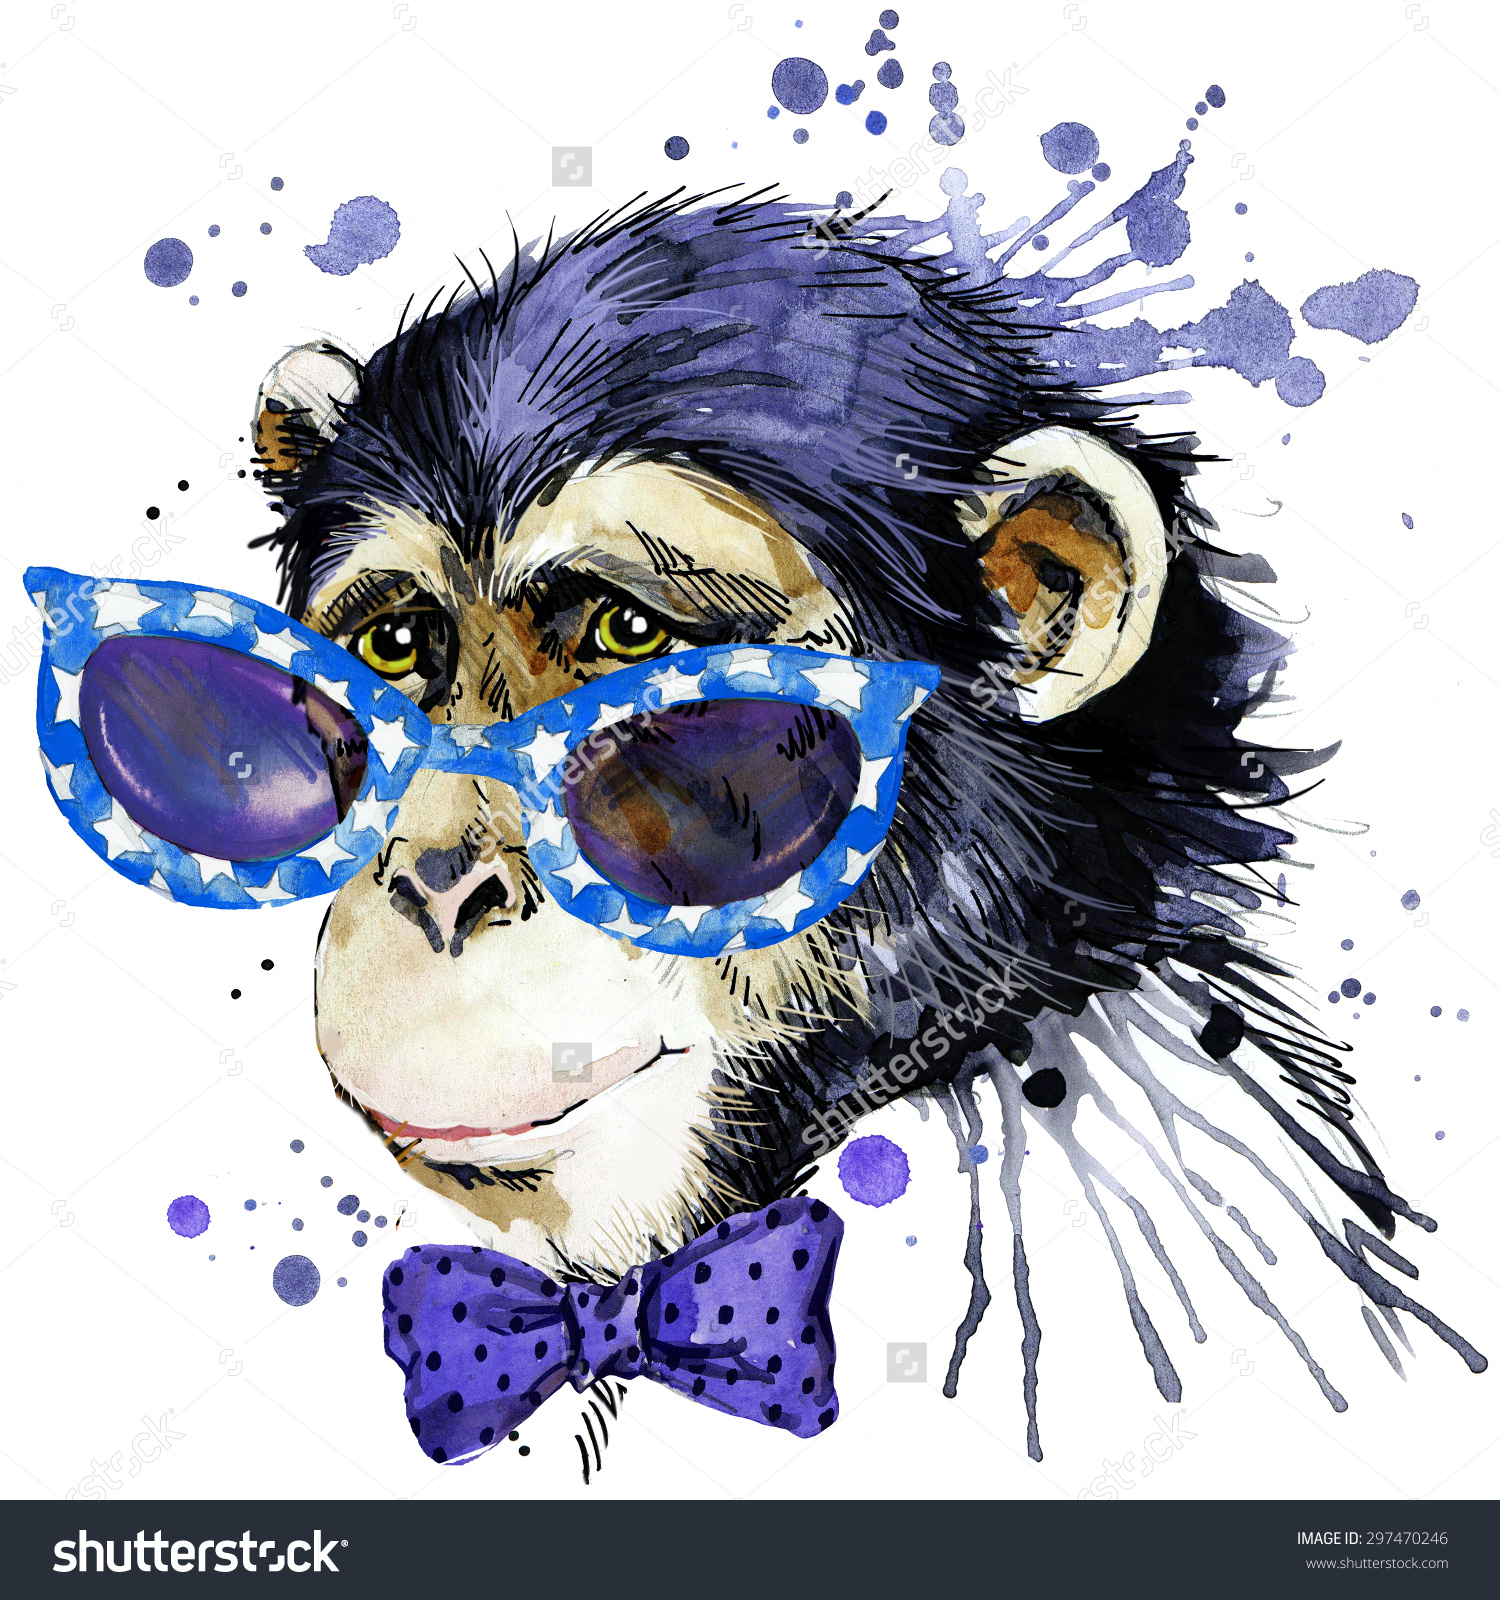 Background Unusual Illustration Watercolor Monkey For Fashion Print